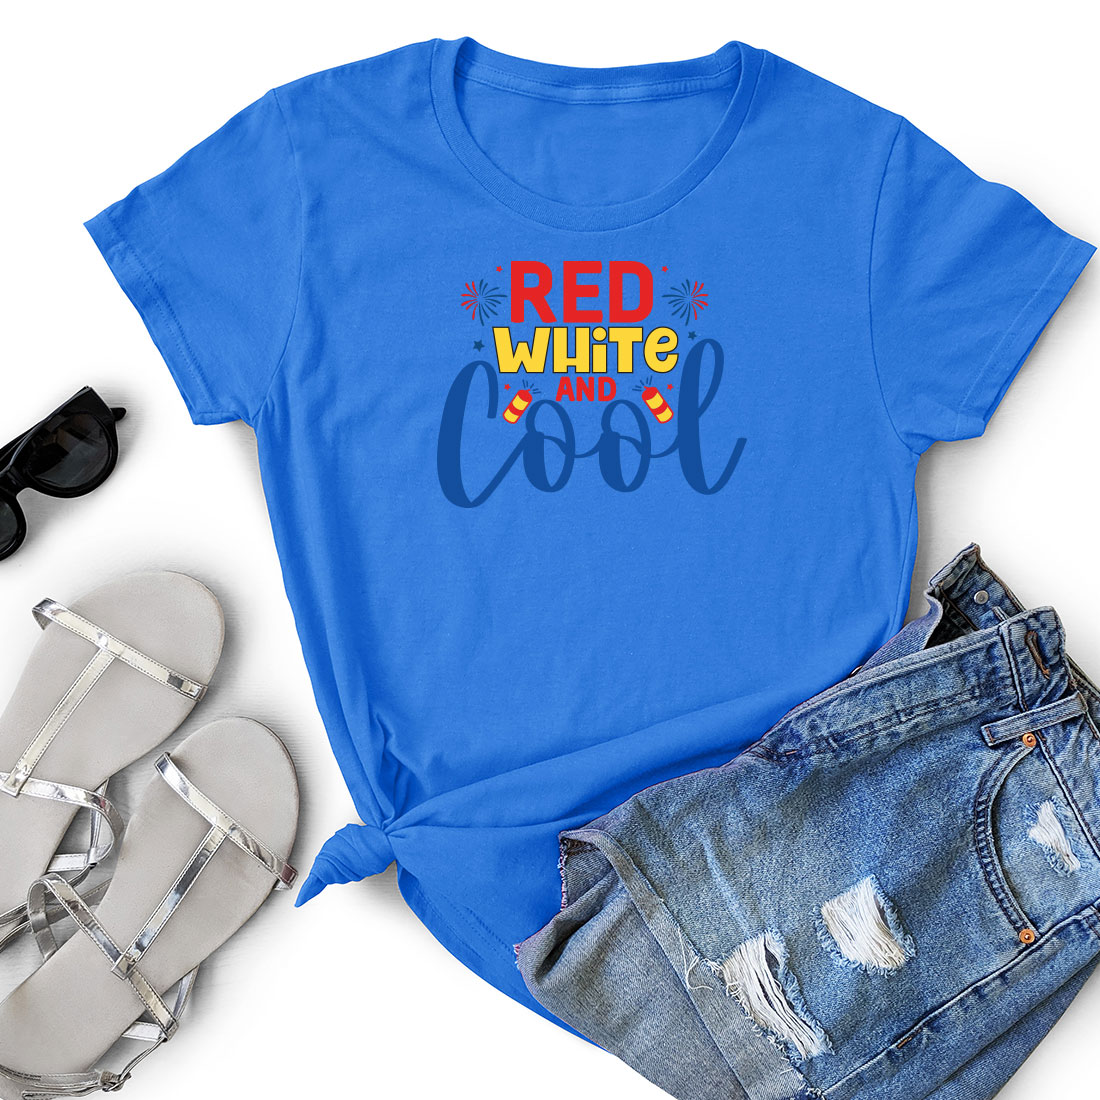 T - shirt that says red white and cool.